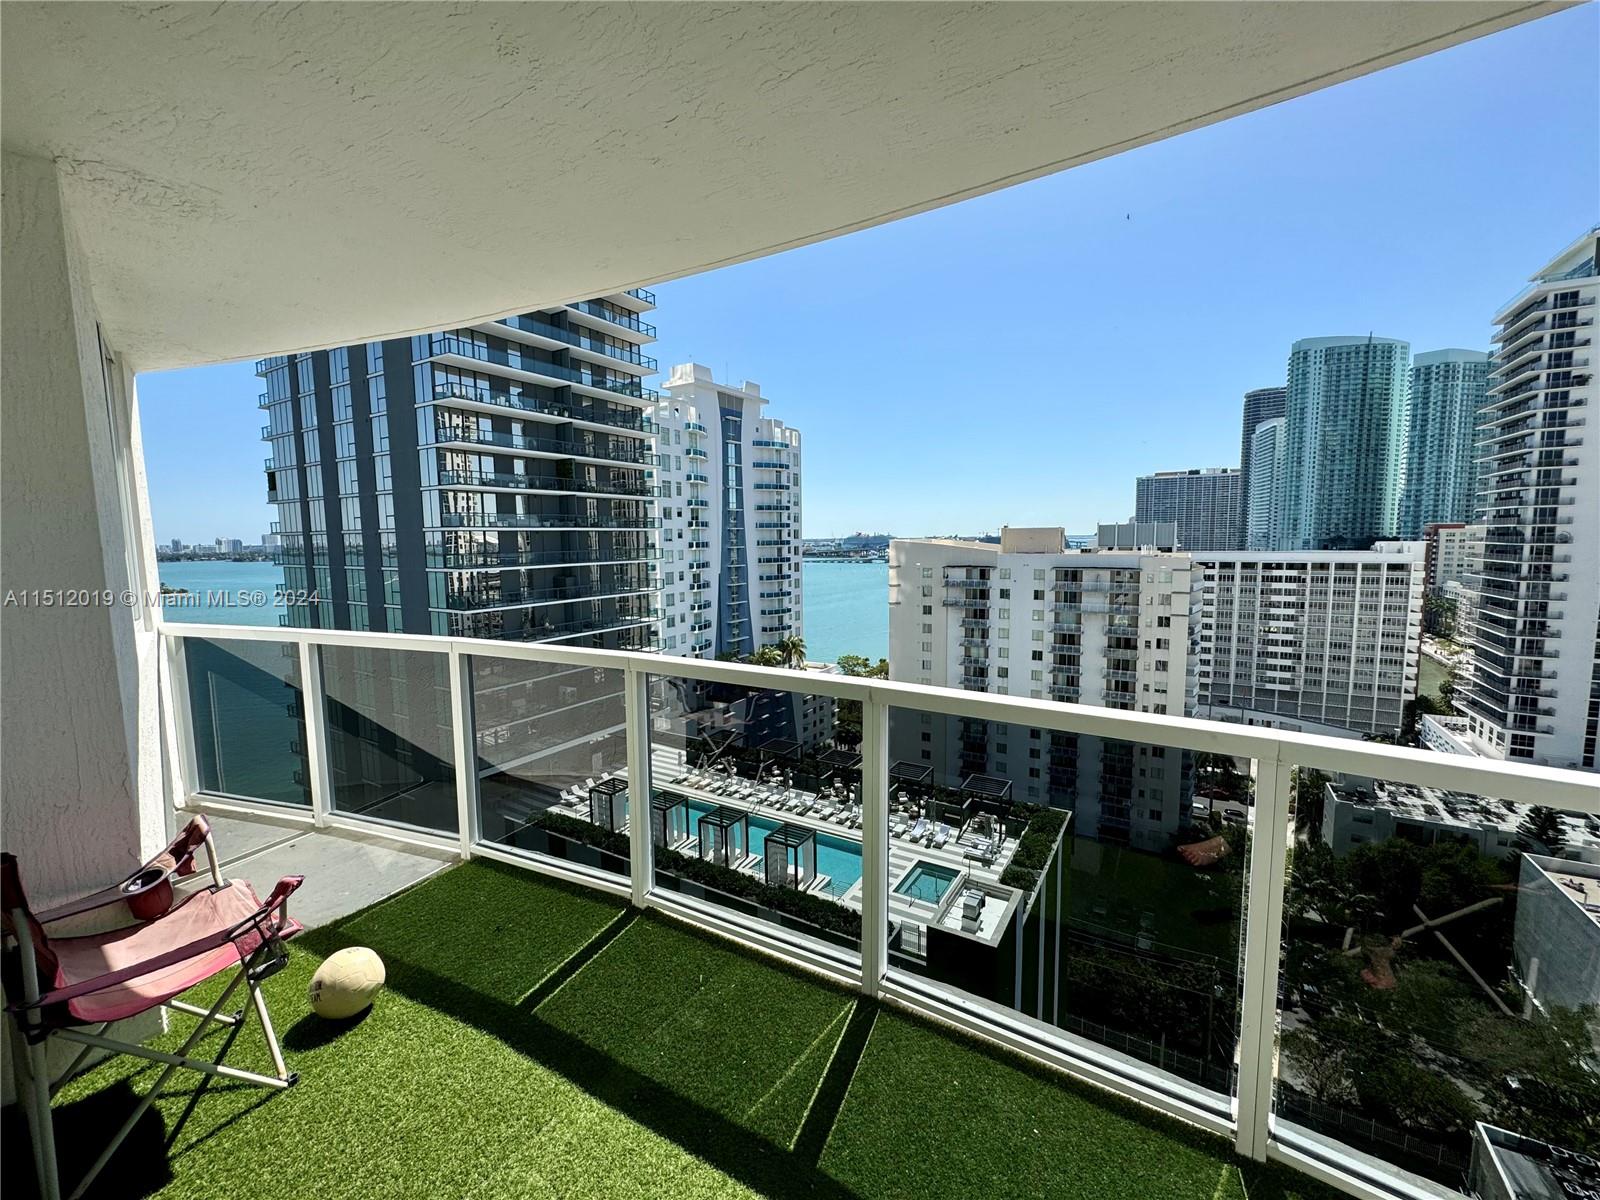 2 bedroom 2 bath apartment nicely decorated and FULLY FURNISHED. 2 ASSIGNED PARKING SPACES. Downtown & bay views from every room.  Boutique building with Pool with loungers, Jacuzzi, Gym, and Concerge at the door.
Heart of Edgewater walking distance to popular restaurants and shops. Midtown, Wynwood, Downtown/Bricklle a few blocks away. in the heart of it all.